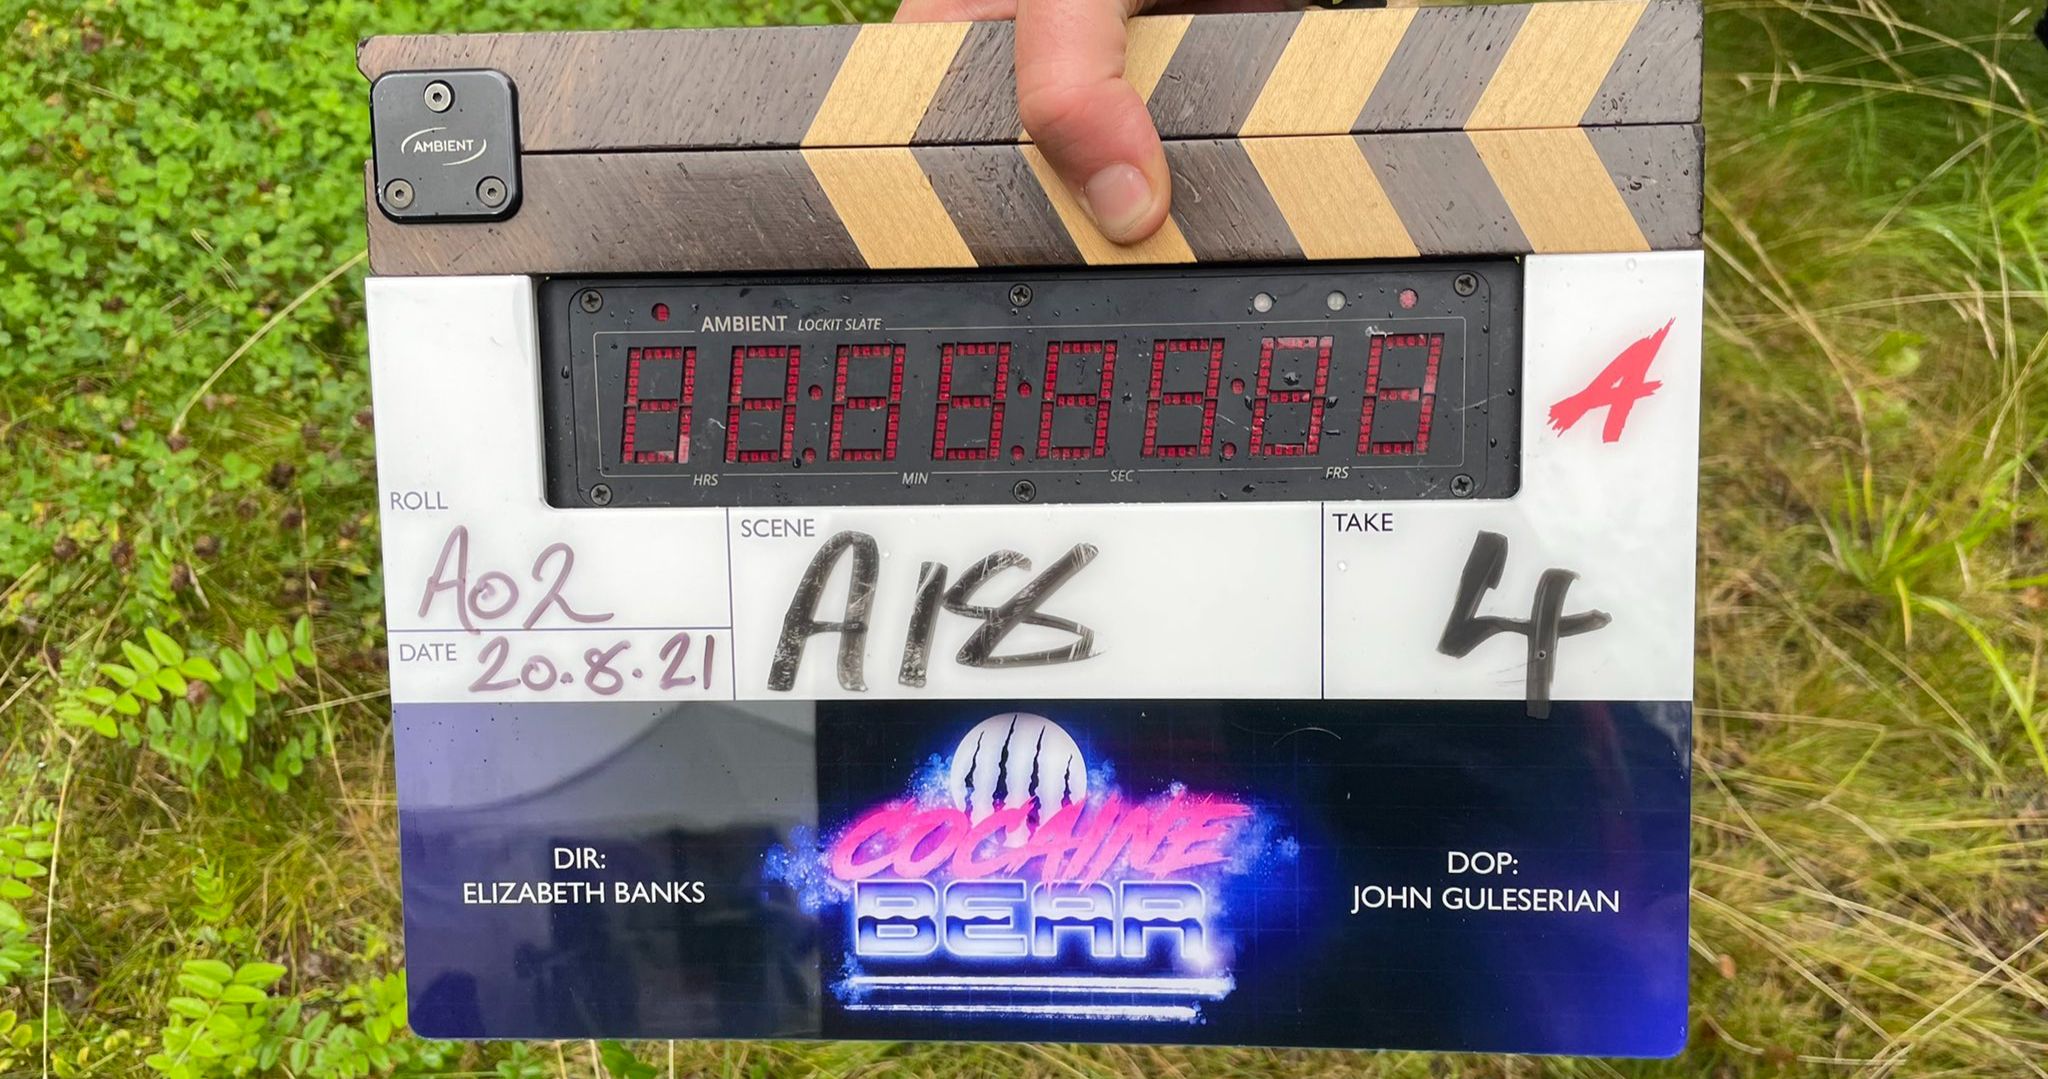 Cocaine Bear Gets an Awesome '80s Logo as Filming Begins